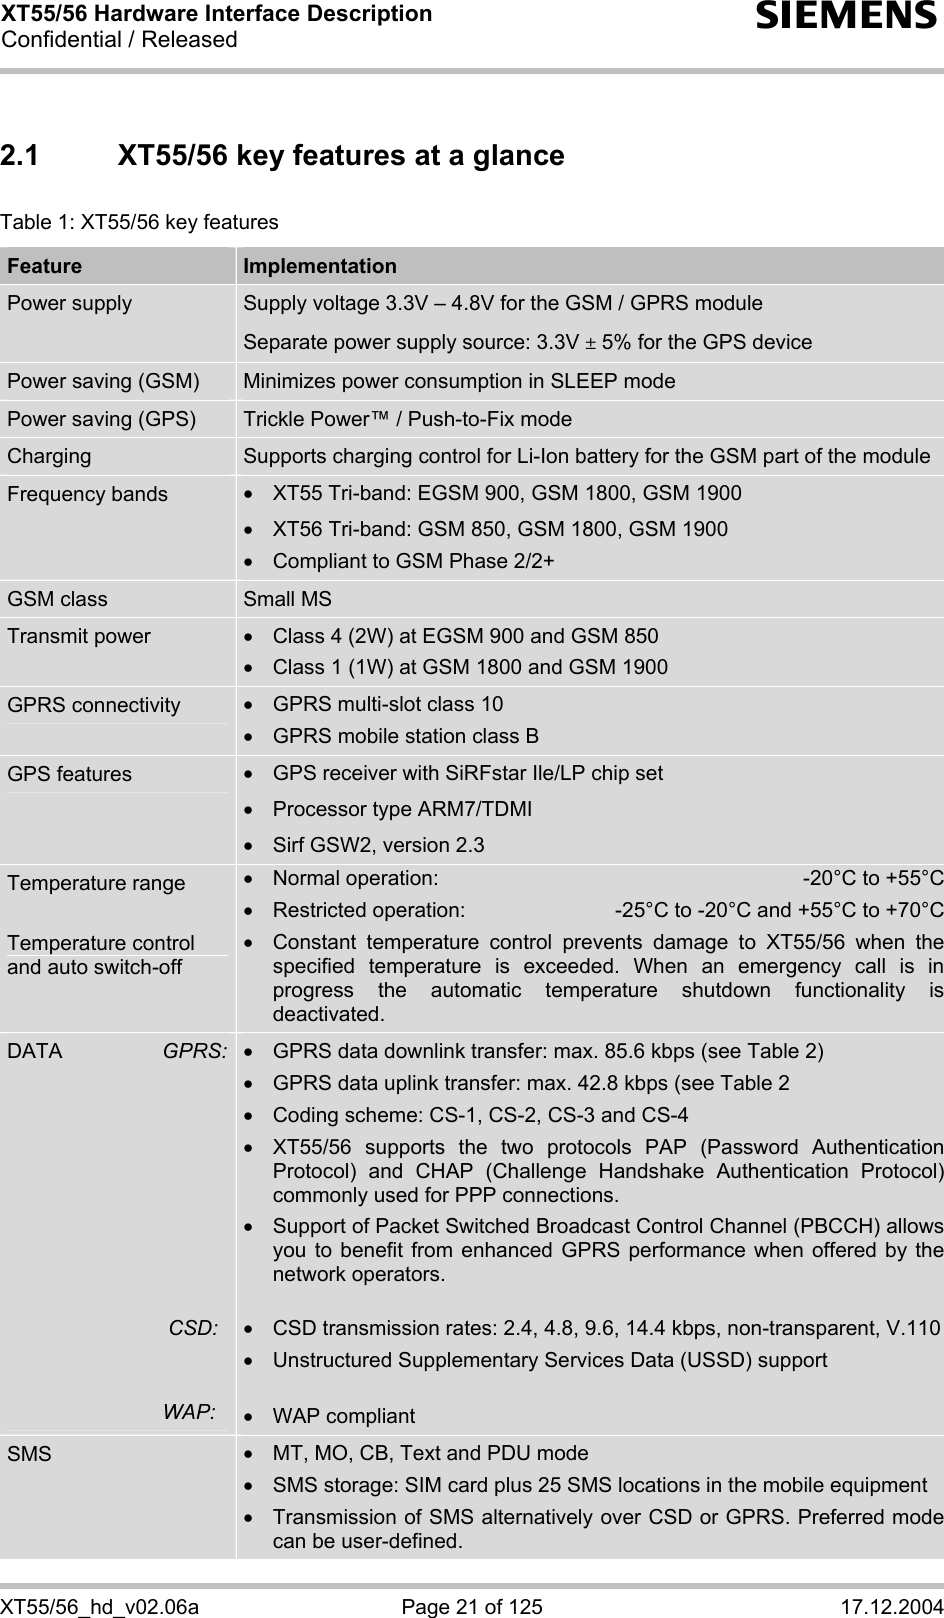 XT55/56 Hardware Interface Description Confidential / Released s XT55/56_hd_v02.06a  Page 21 of 125  17.12.2004 2.1  XT55/56 key features at a glance Table 1: XT55/56 key features  Feature  Implementation Power supply  Supply voltage 3.3V – 4.8V for the GSM / GPRS module Separate power supply source: 3.3V ± 5% for the GPS device Power saving (GSM)  Minimizes power consumption in SLEEP mode  Power saving (GPS)  Trickle Power™ / Push-to-Fix mode  Charging  Supports charging control for Li-Ion battery for the GSM part of the module Frequency bands  •  XT55 Tri-band: EGSM 900, GSM 1800, GSM 1900 •  XT56 Tri-band: GSM 850, GSM 1800, GSM 1900 •  Compliant to GSM Phase 2/2+ GSM class  Small MS Transmit power  •  Class 4 (2W) at EGSM 900 and GSM 850 •  Class 1 (1W) at GSM 1800 and GSM 1900 GPRS connectivity  •  GPRS multi-slot class 10 •  GPRS mobile station class B GPS features  •  GPS receiver with SiRFstar Ile/LP chip set •  Processor type ARM7/TDMI •  Sirf GSW2, version 2.3 Temperature range   Temperature control and auto switch-off •  Normal operation:   -20°C to +55°C •  Restricted operation:   -25°C to -20°C and +55°C to +70°C•  Constant temperature control prevents damage to XT55/56 when the specified temperature is exceeded. When an emergency call is in progress the automatic temperature shutdown functionality is deactivated. DATA  GPRS:            CSD:    WAP: •  GPRS data downlink transfer: max. 85.6 kbps (see Table 2) •  GPRS data uplink transfer: max. 42.8 kbps (see Table 2 •  Coding scheme: CS-1, CS-2, CS-3 and CS-4 •  XT55/56 supports the two protocols PAP (Password Authentication Protocol) and CHAP (Challenge Handshake Authentication Protocol) commonly used for PPP connections. •  Support of Packet Switched Broadcast Control Channel (PBCCH) allows you to benefit from enhanced GPRS performance when offered by the network operators.   •  CSD transmission rates: 2.4, 4.8, 9.6, 14.4 kbps, non-transparent, V.110•  Unstructured Supplementary Services Data (USSD) support   • WAP compliant SMS  •  MT, MO, CB, Text and PDU mode •  SMS storage: SIM card plus 25 SMS locations in the mobile equipment •  Transmission of SMS alternatively over CSD or GPRS. Preferred mode can be user-defined. 